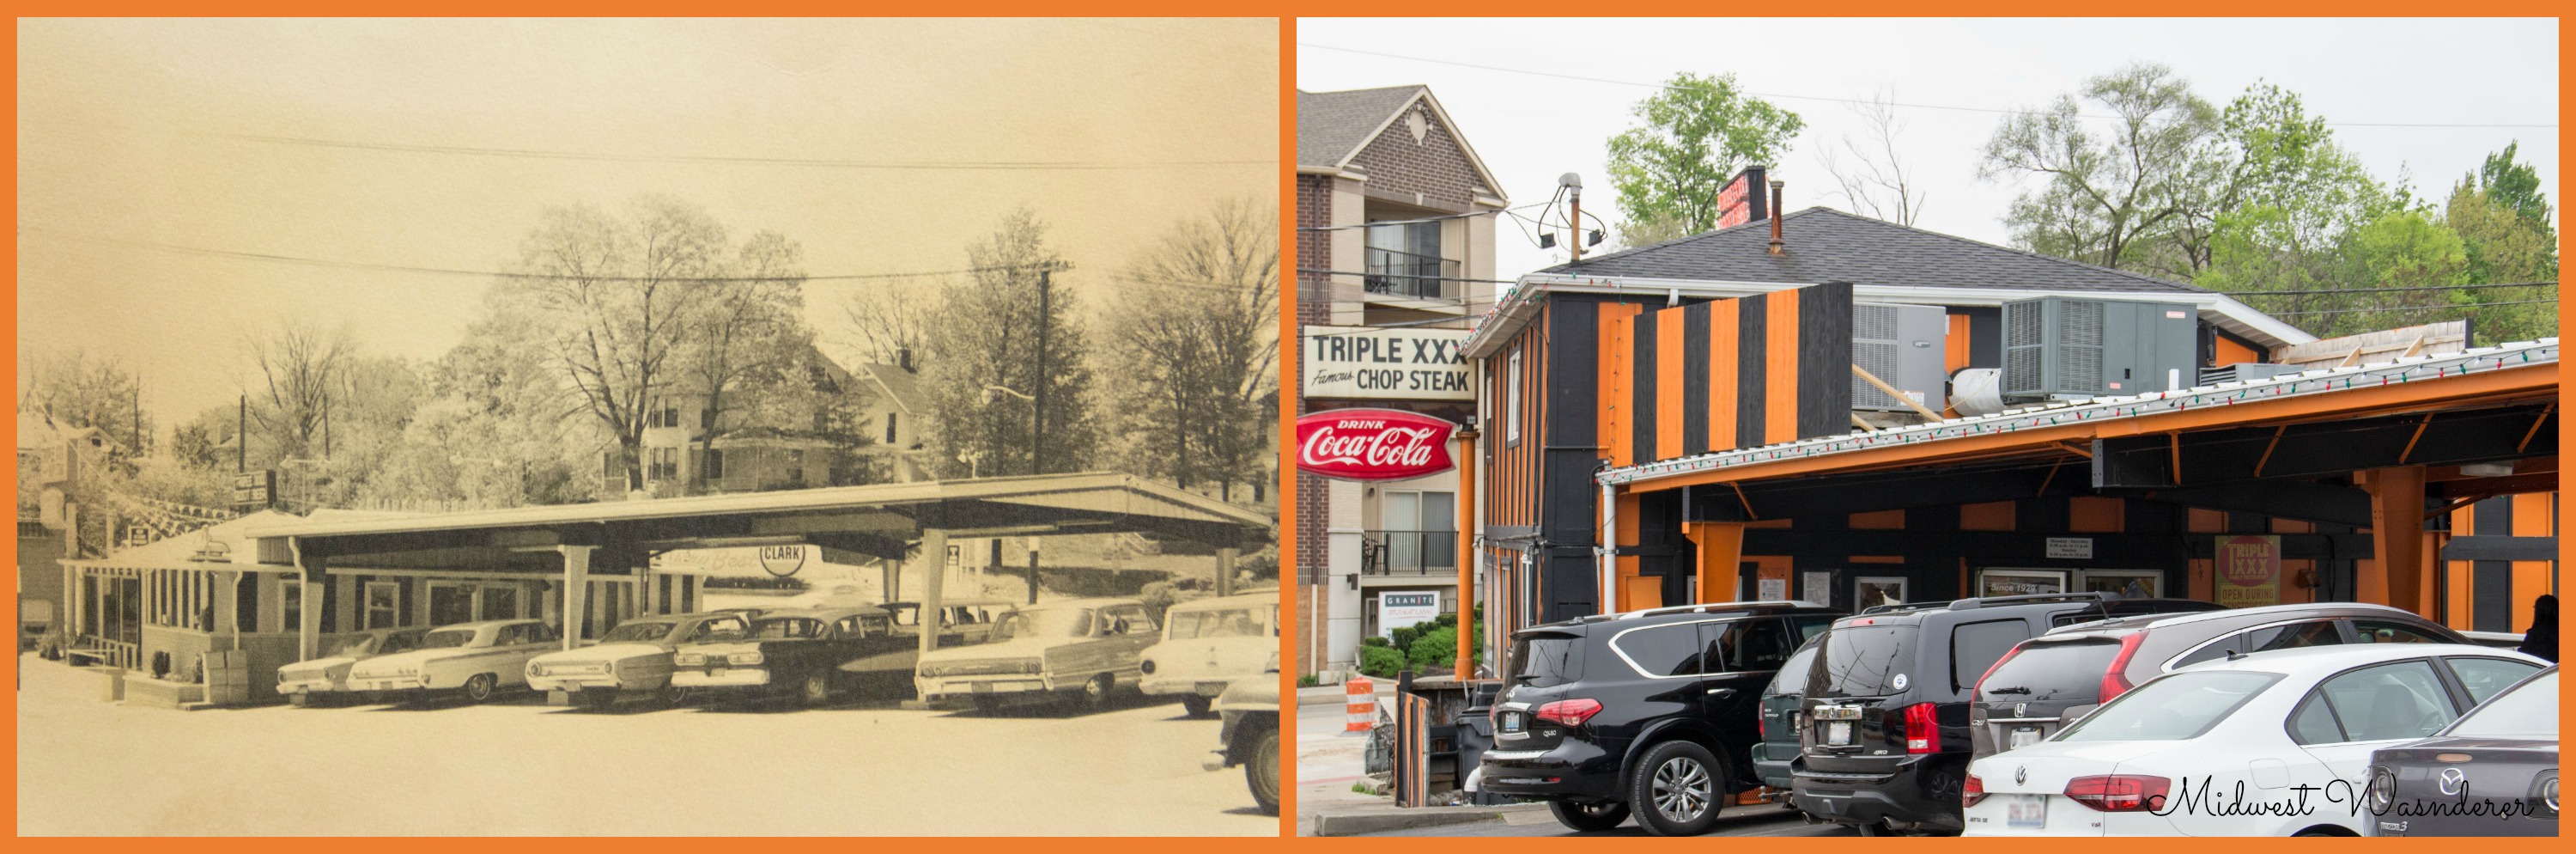 Triple XXX Family Restaurant then and now